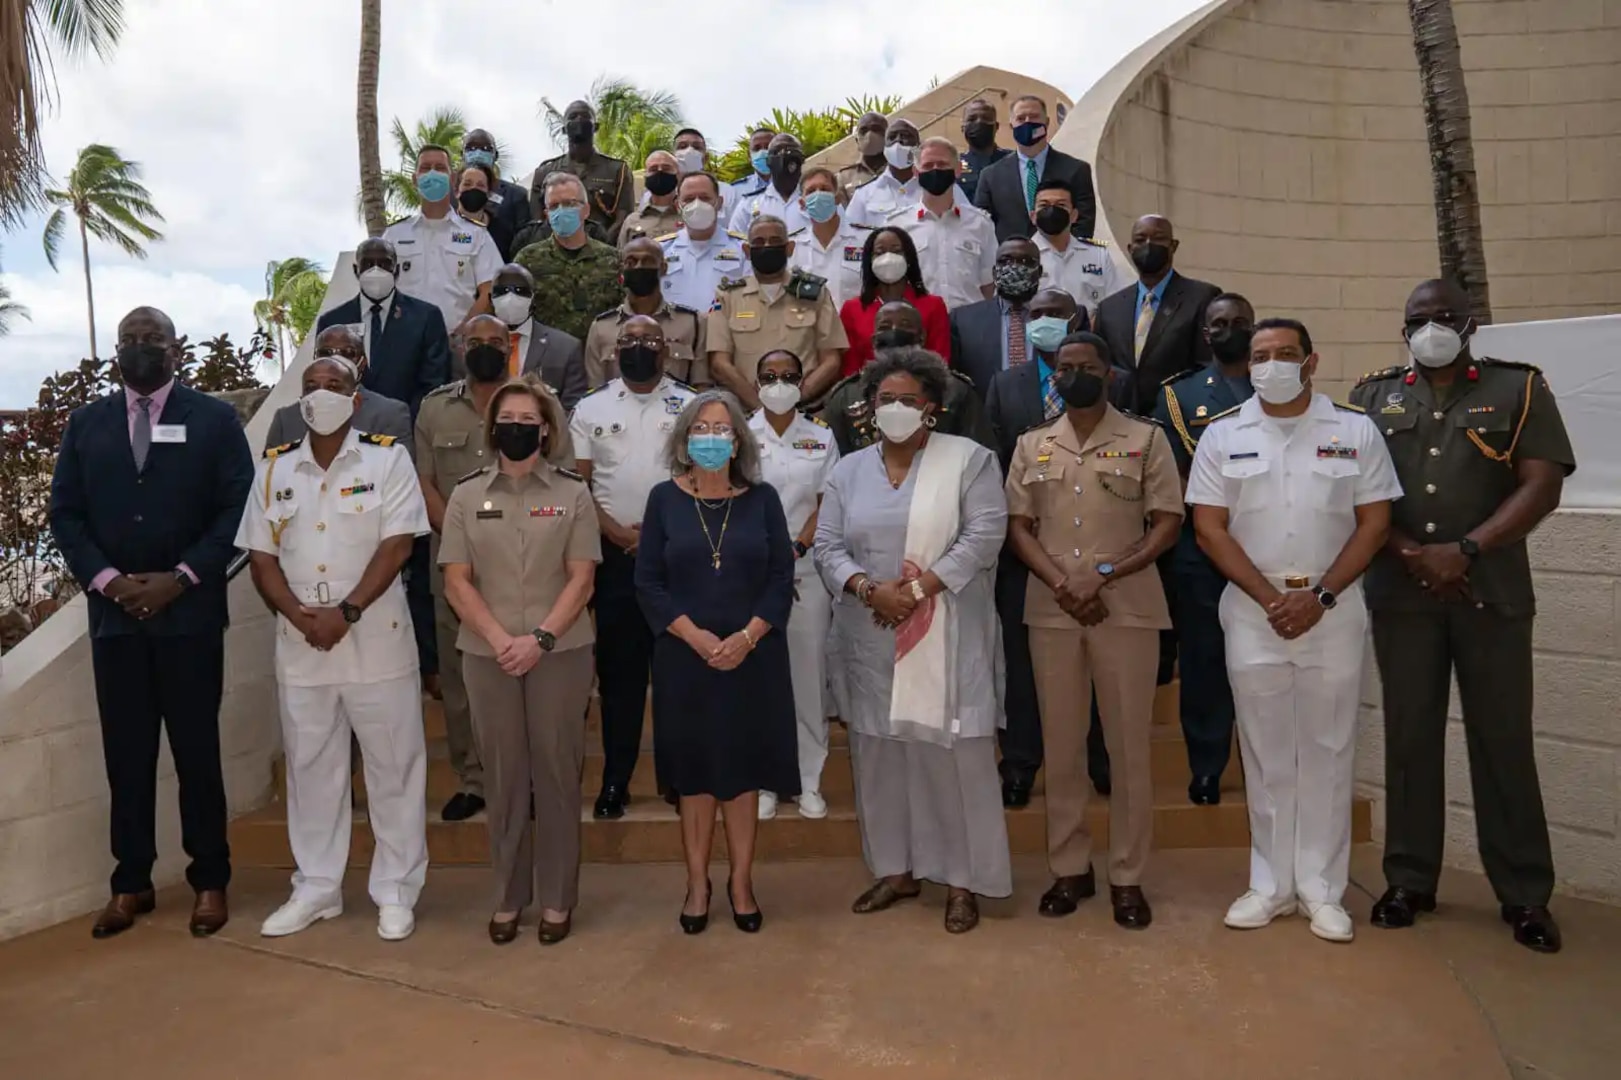 Group photo of senior leaders from 21 nations taking part in the 2022 Caribbean Nations Security Conference (CANSEC 22) in Barbados.